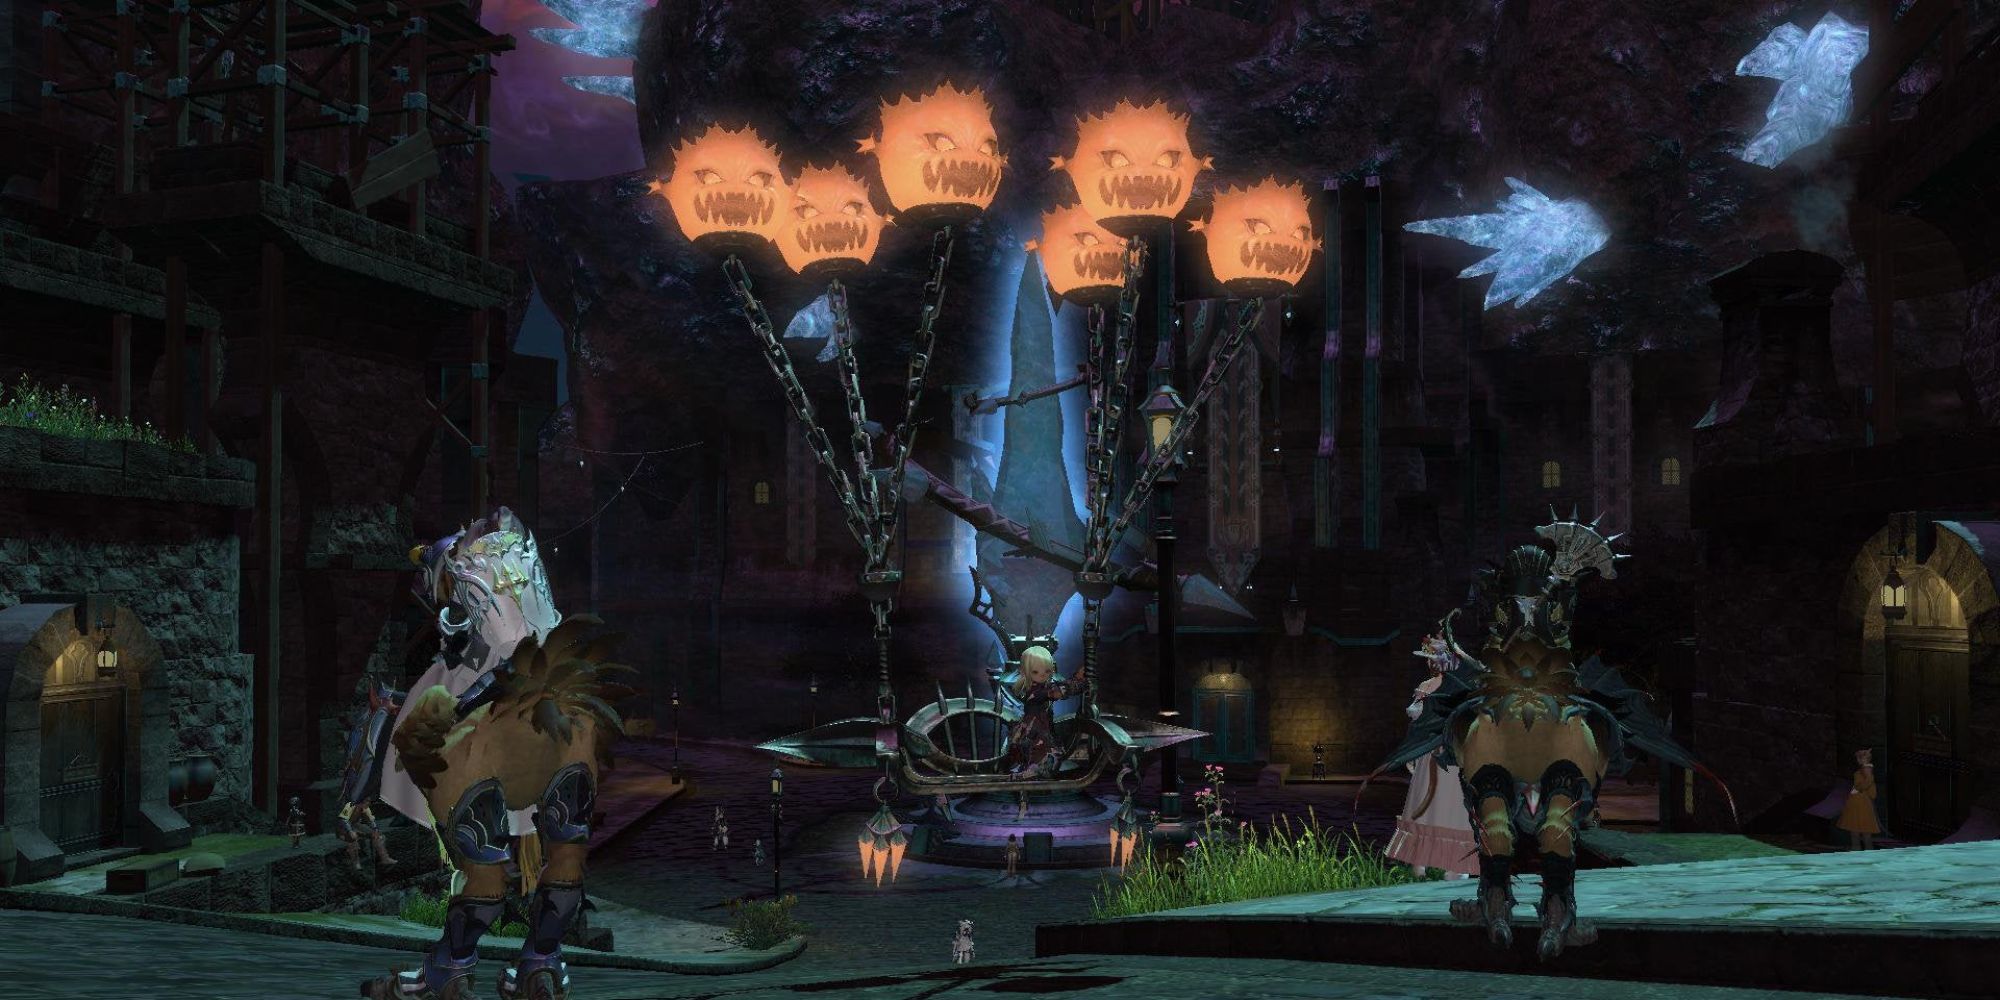 Final Fantasy 14 Bomb Palanquin Mount With Chocobos around at Night